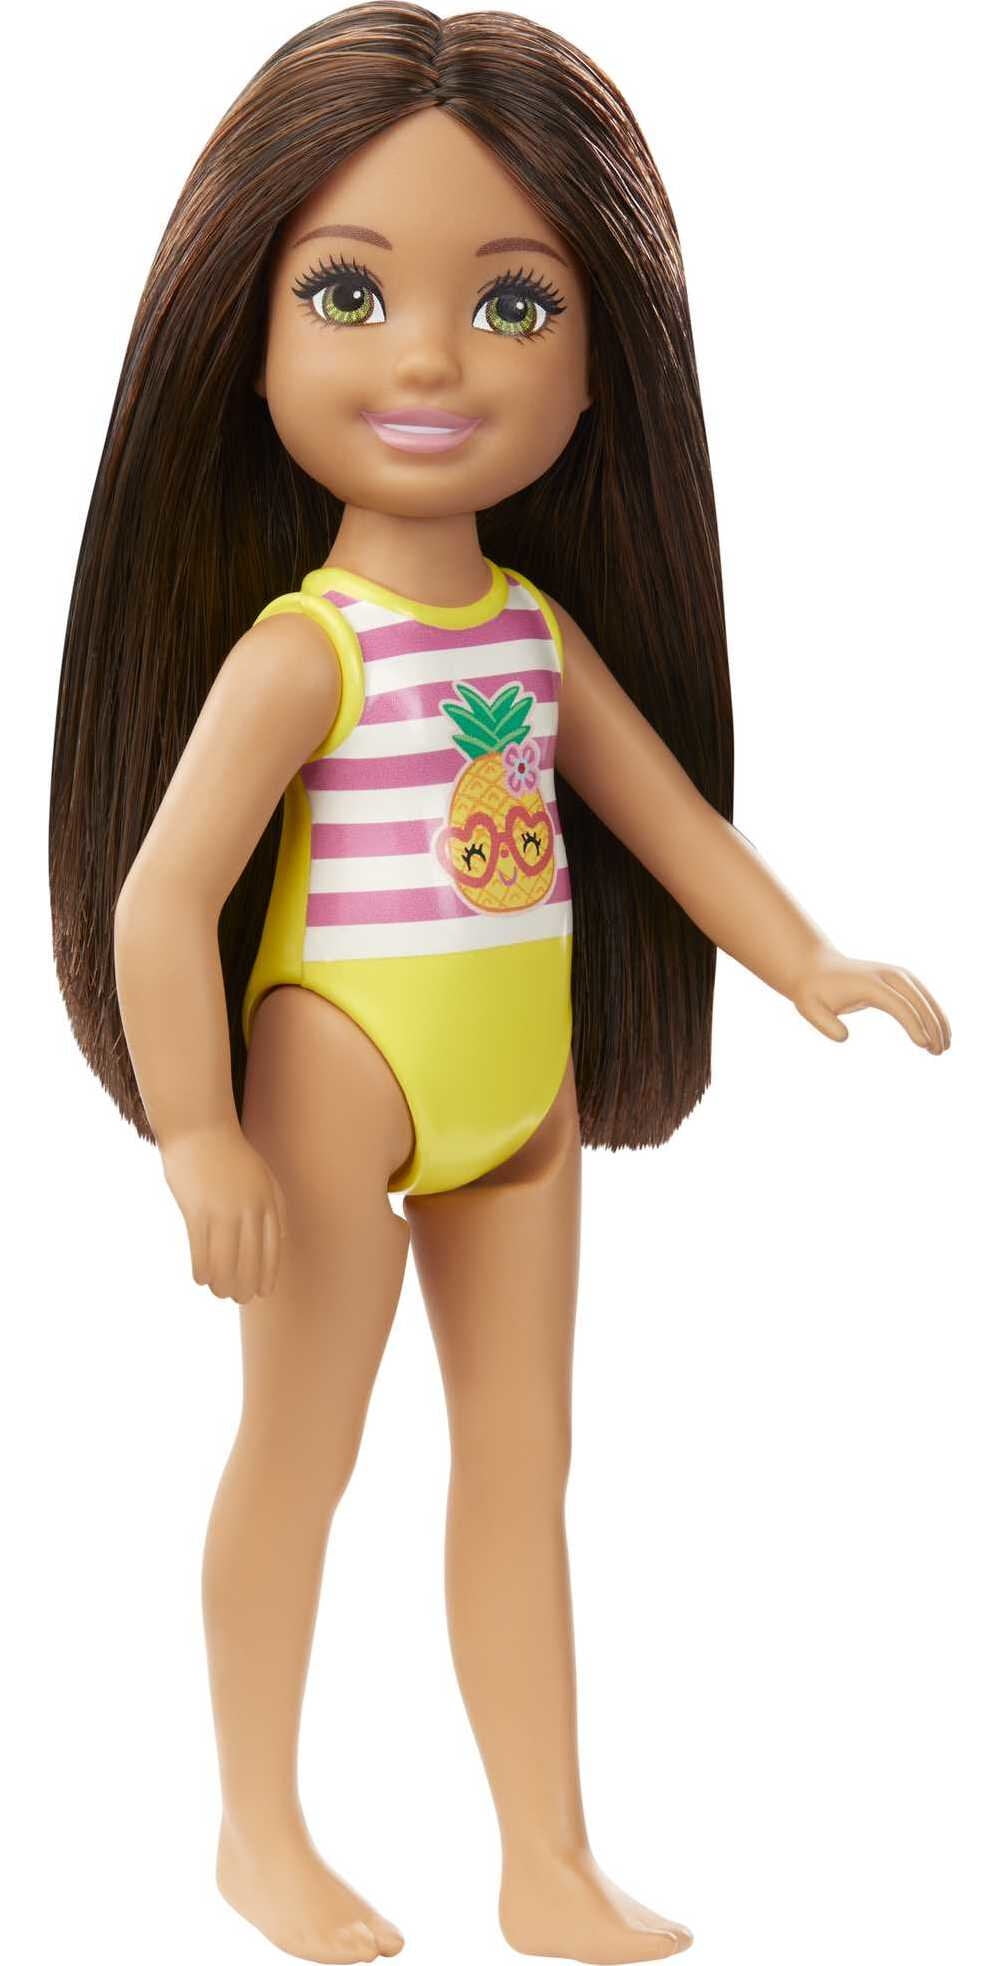 Barbie Club Chelsea Doll, Small Doll with Long Brown Hair, Green Eyes & Pineapple-Graphic Swimsuit